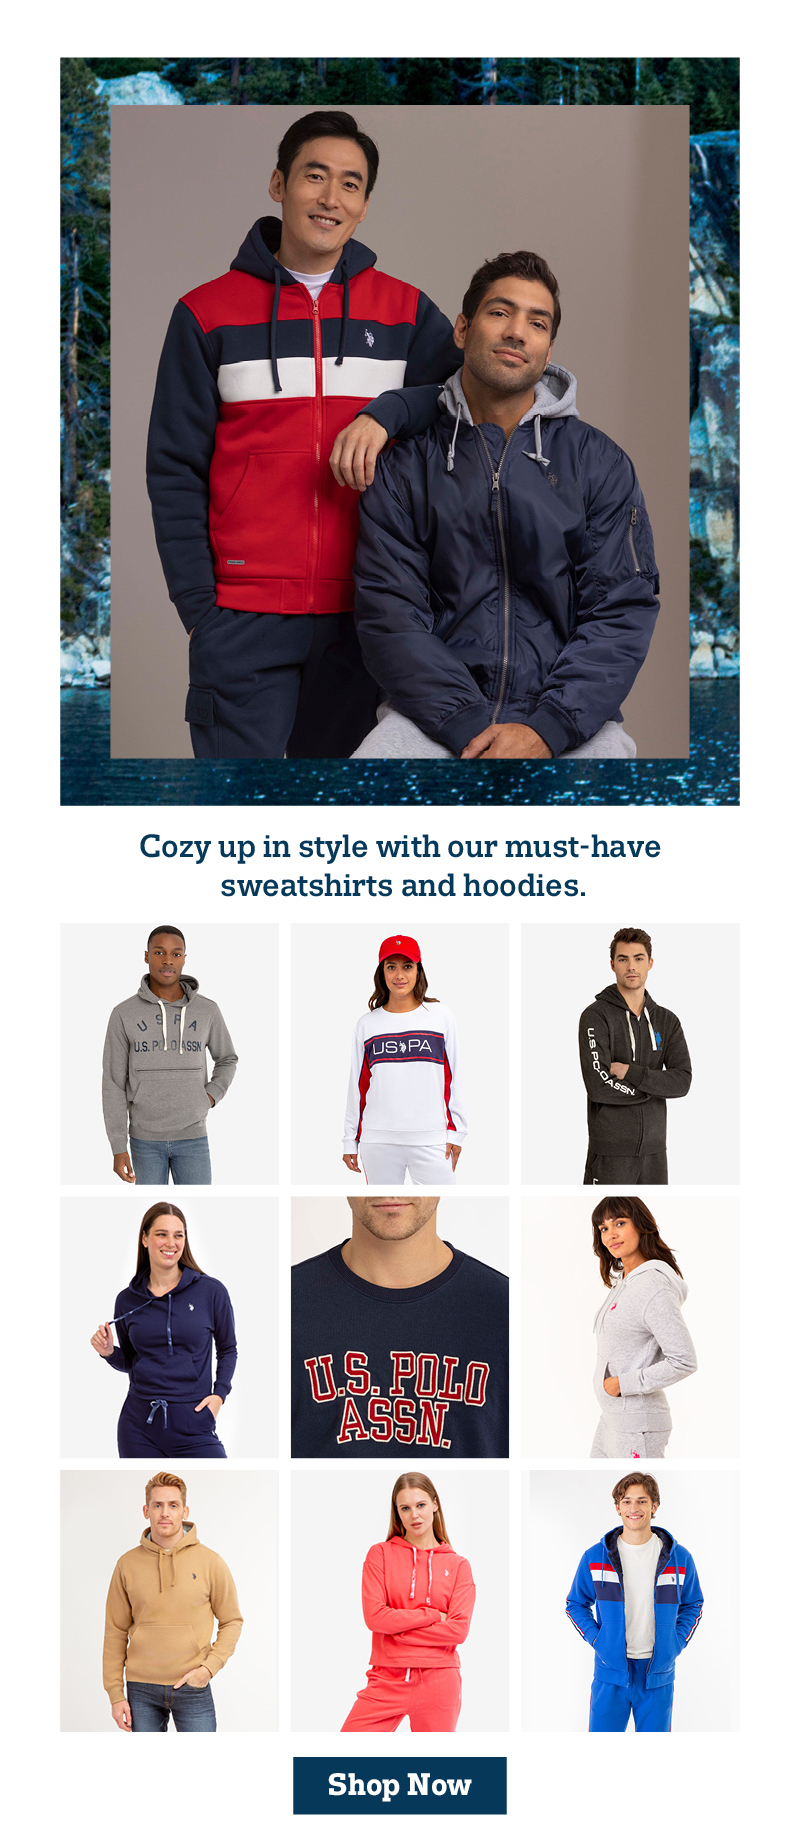 Cozy up in style with our must-have sweatshirts and hoodies. Shop now